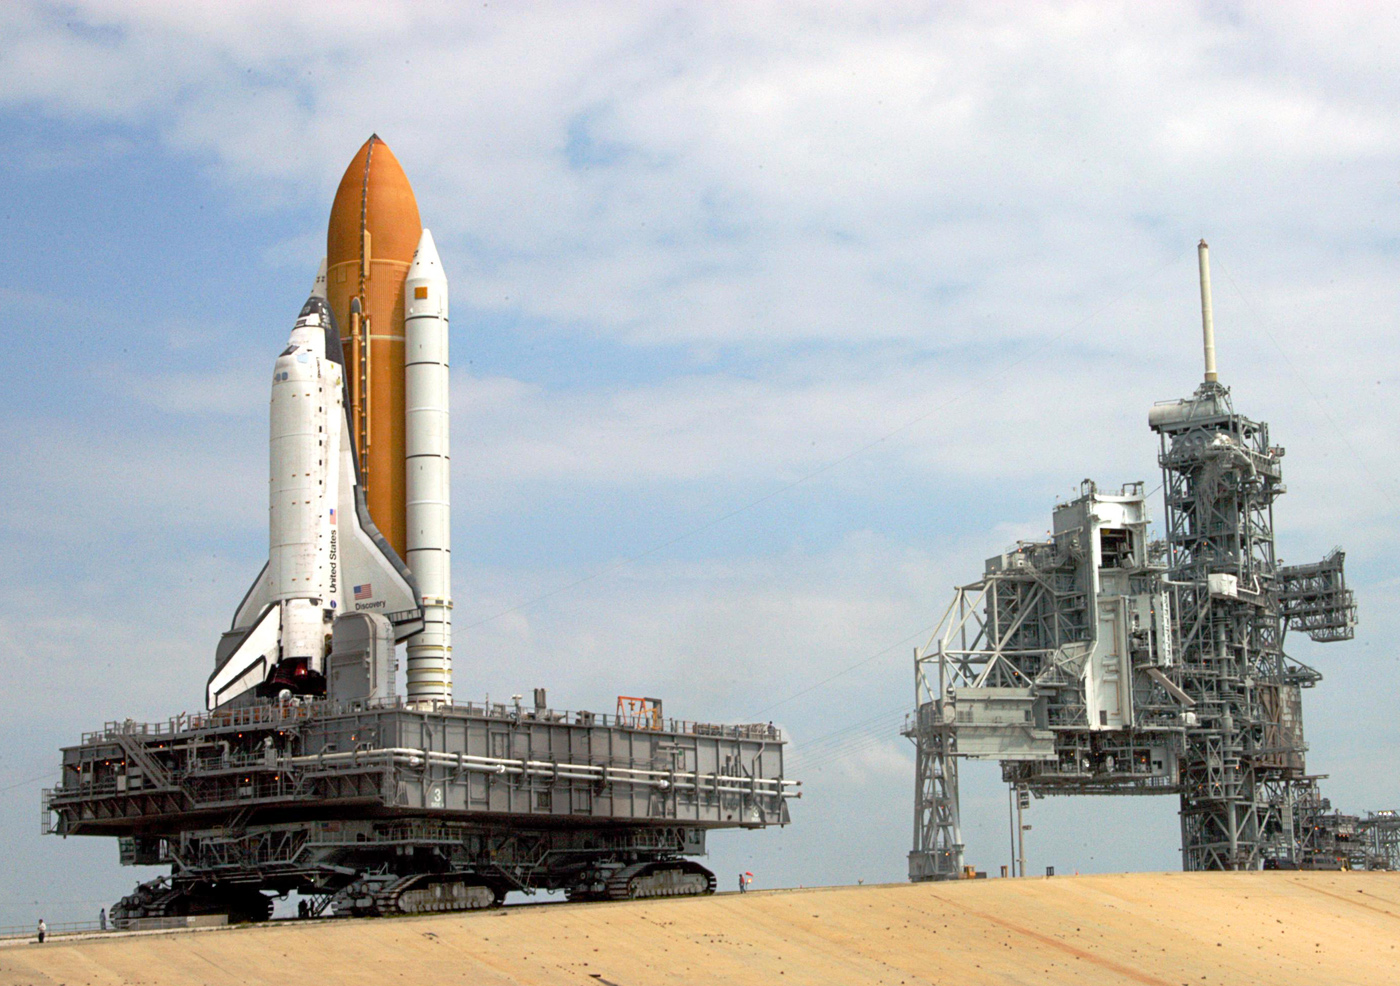 This Is NASA’s New Giant Crawler For Its Next-Generation Spaceship